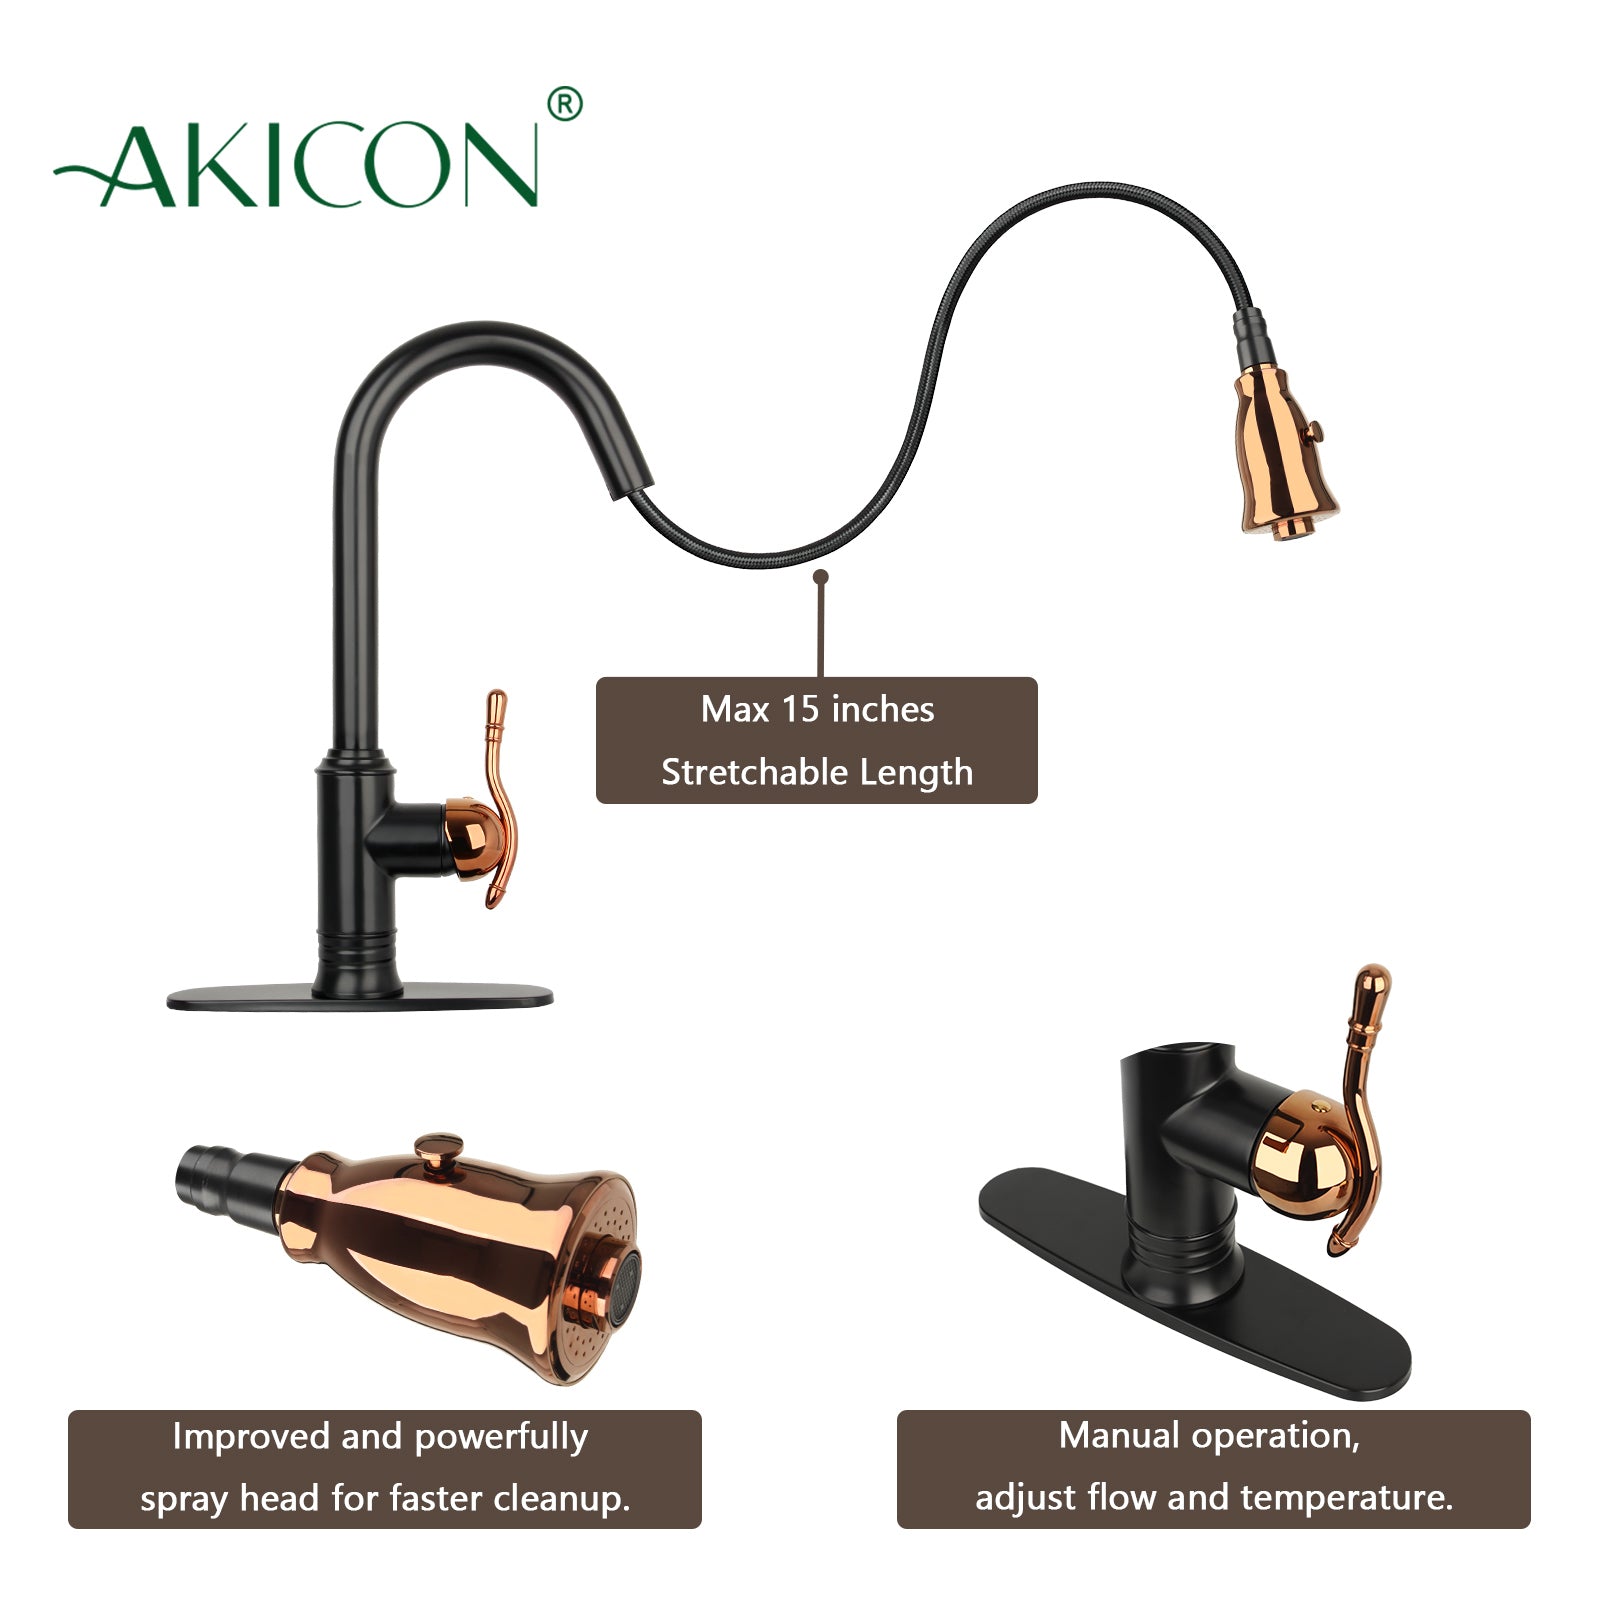 Two-Tone Matte Black & Rose Gold Pull Out Kitchen Faucet with Deck Plate, Single Level Solid Brass Kitchen Sink Faucets with Pull Down Sprayer - AK415BLRG